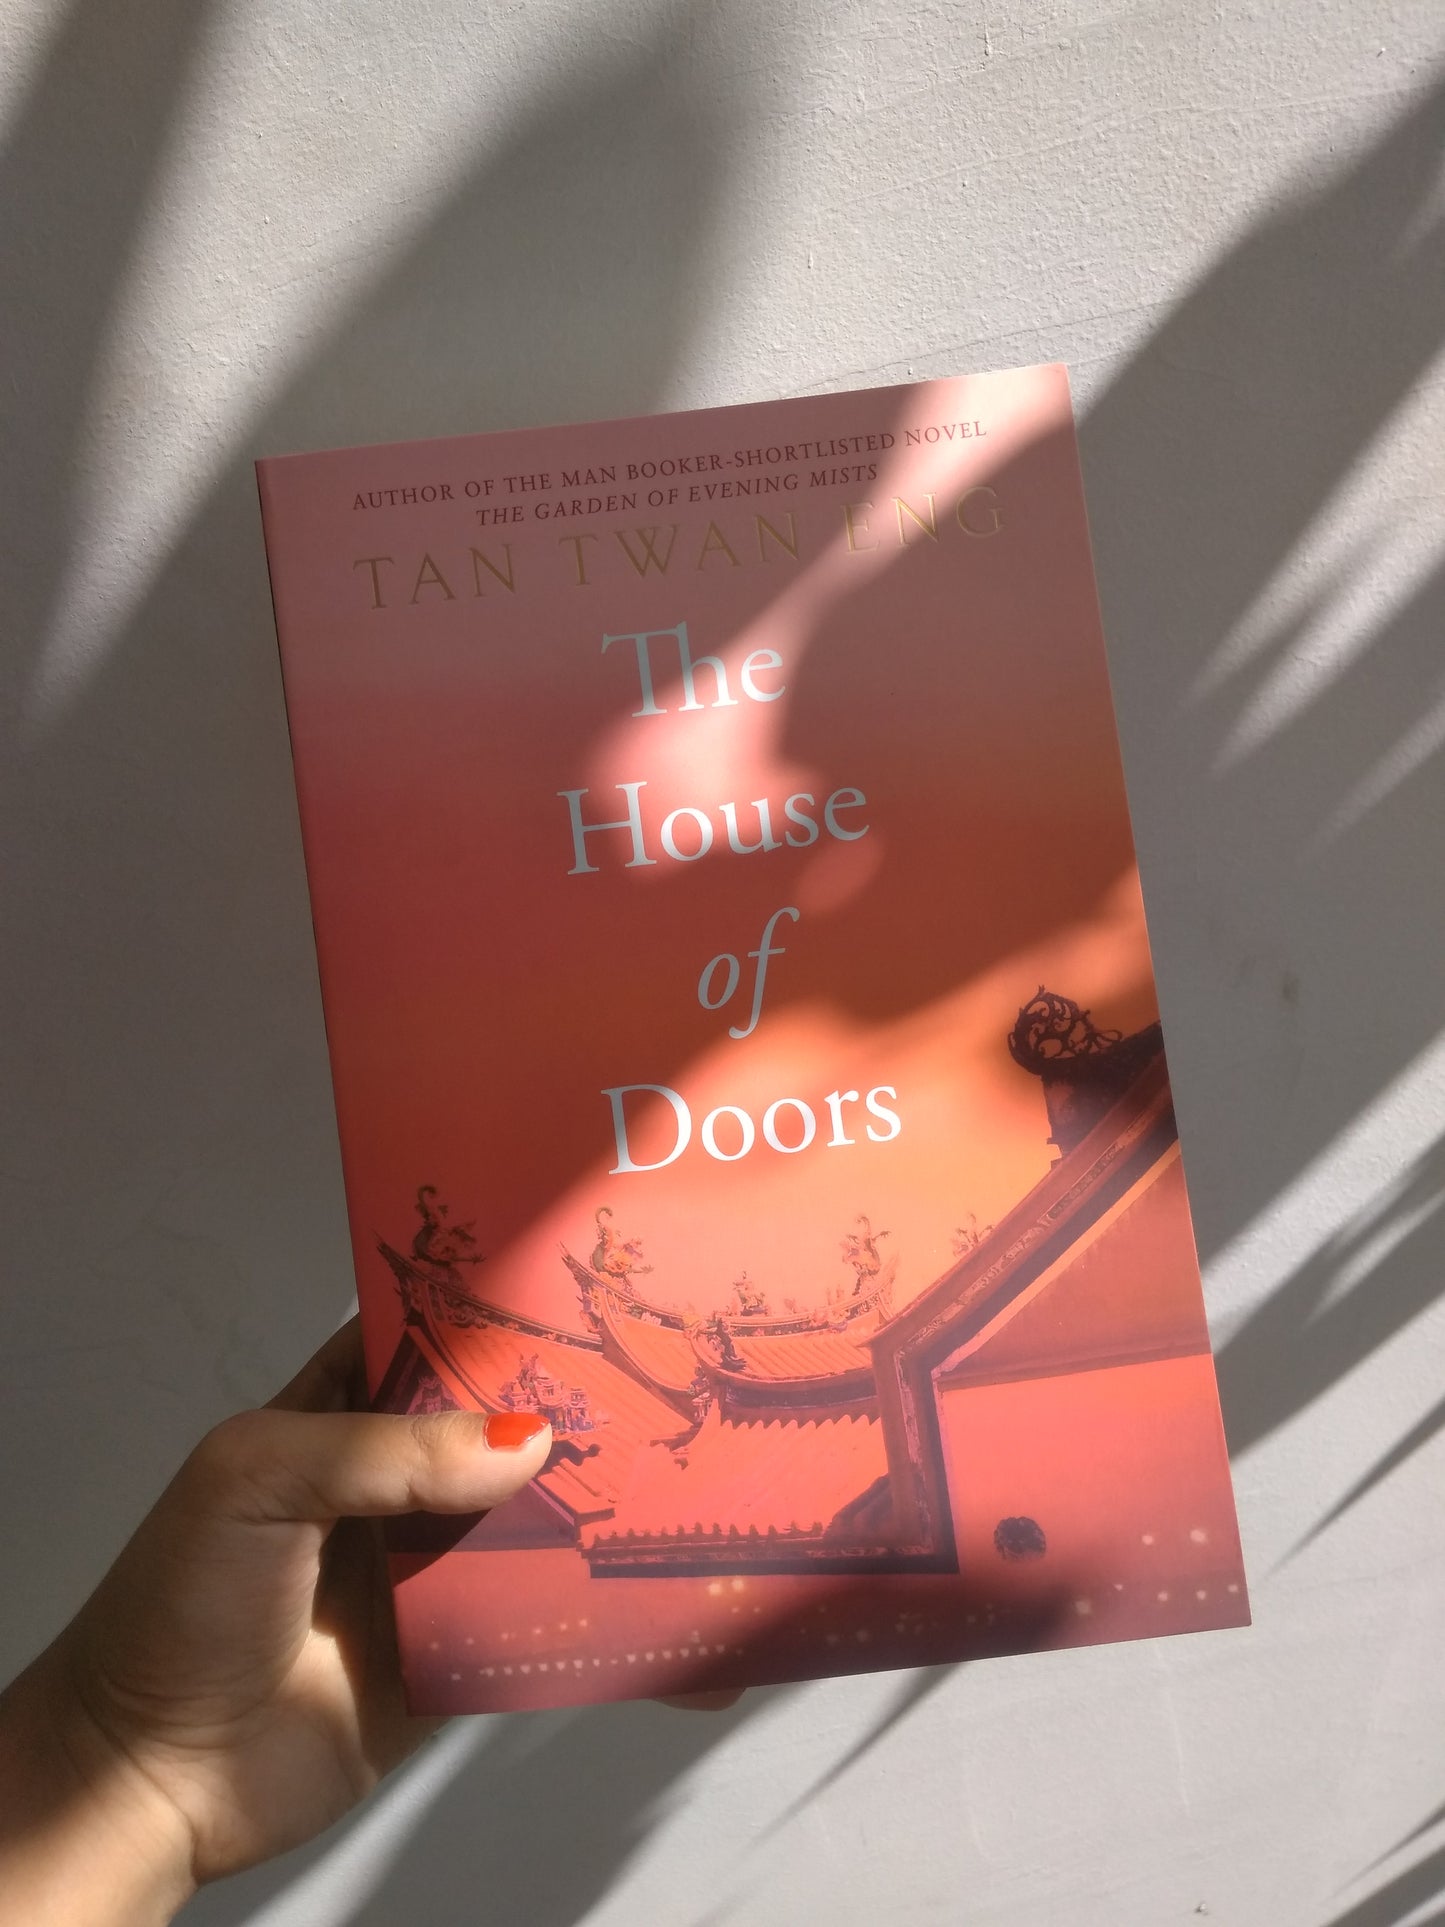 The House of Doors by Tan Twan Eng at BIBLIONEPAL Bookstore